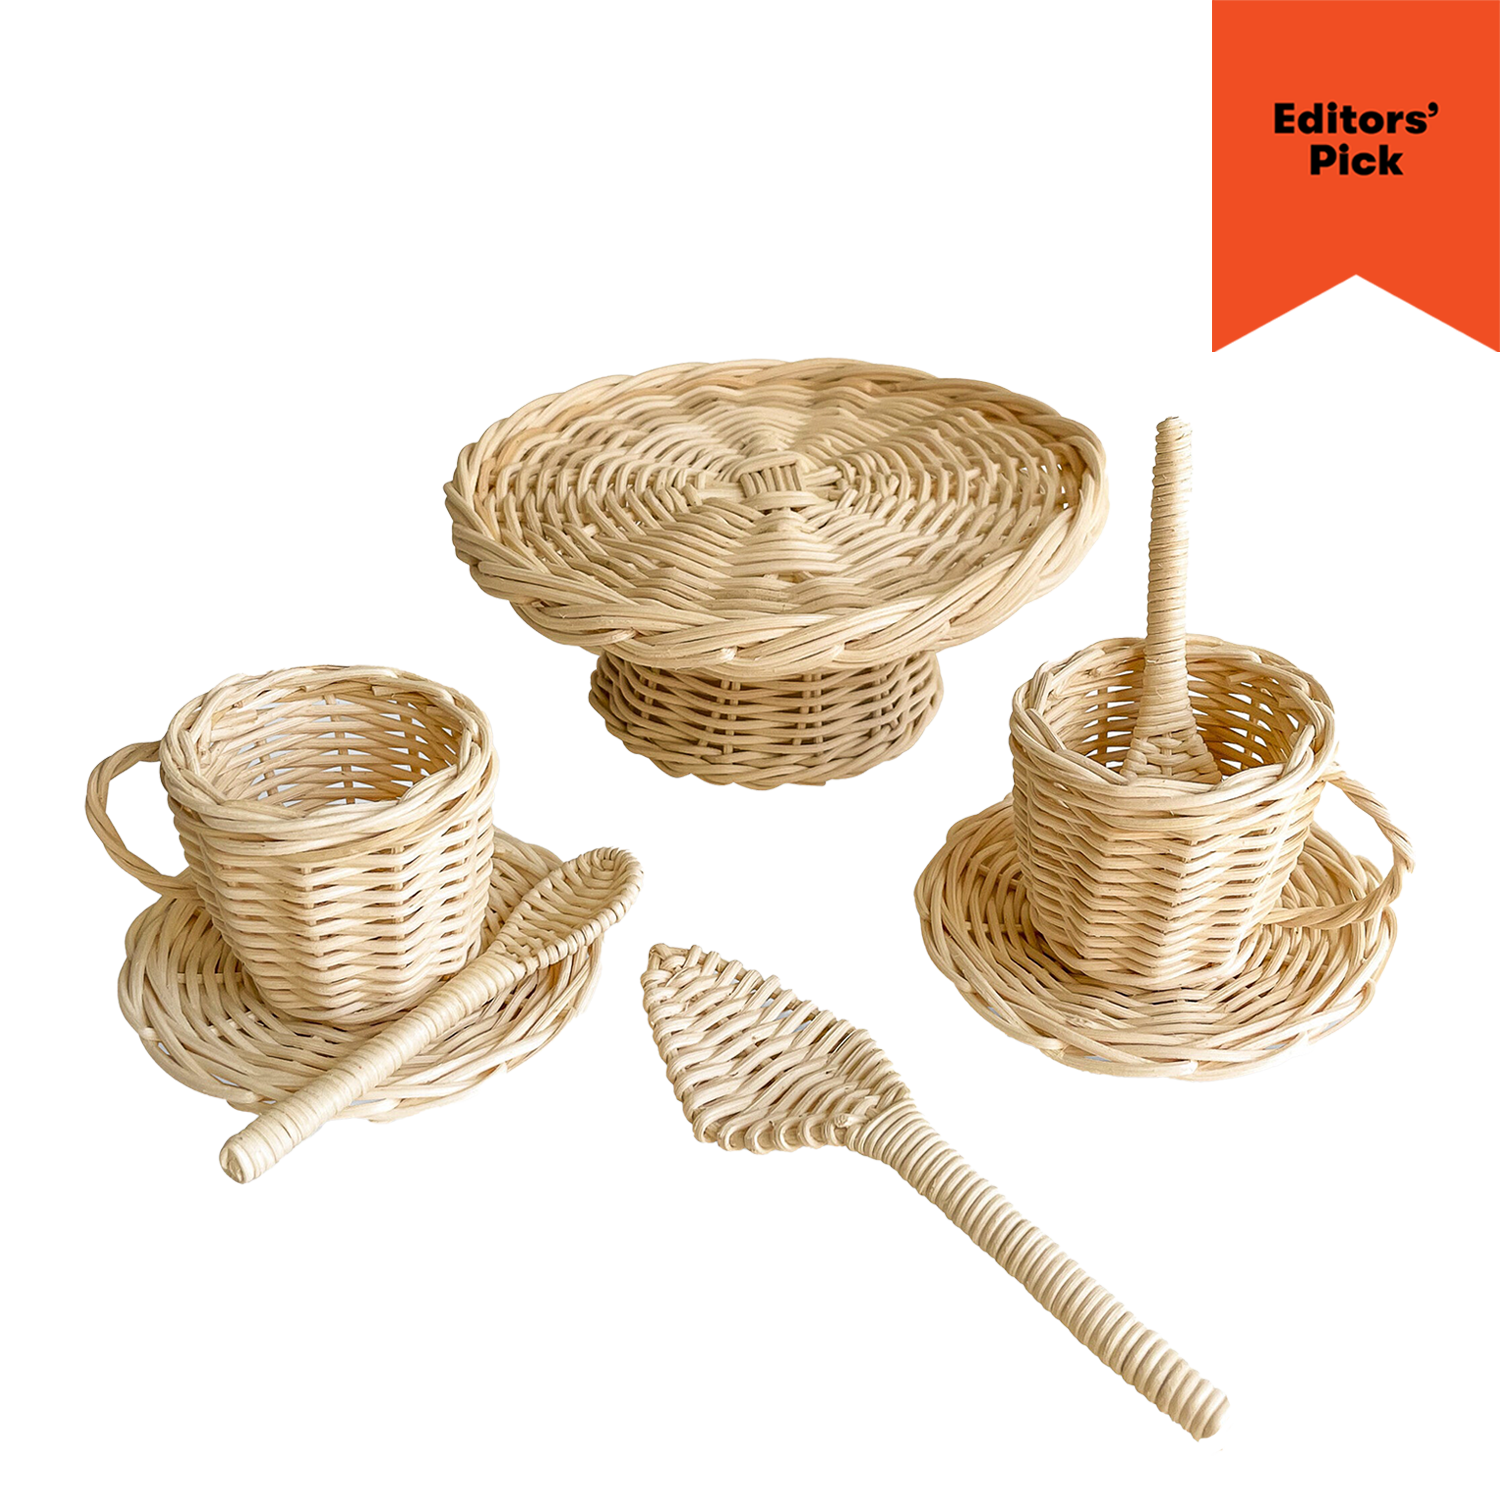 Rattan tea cups, spoons, cake stand, and servingware